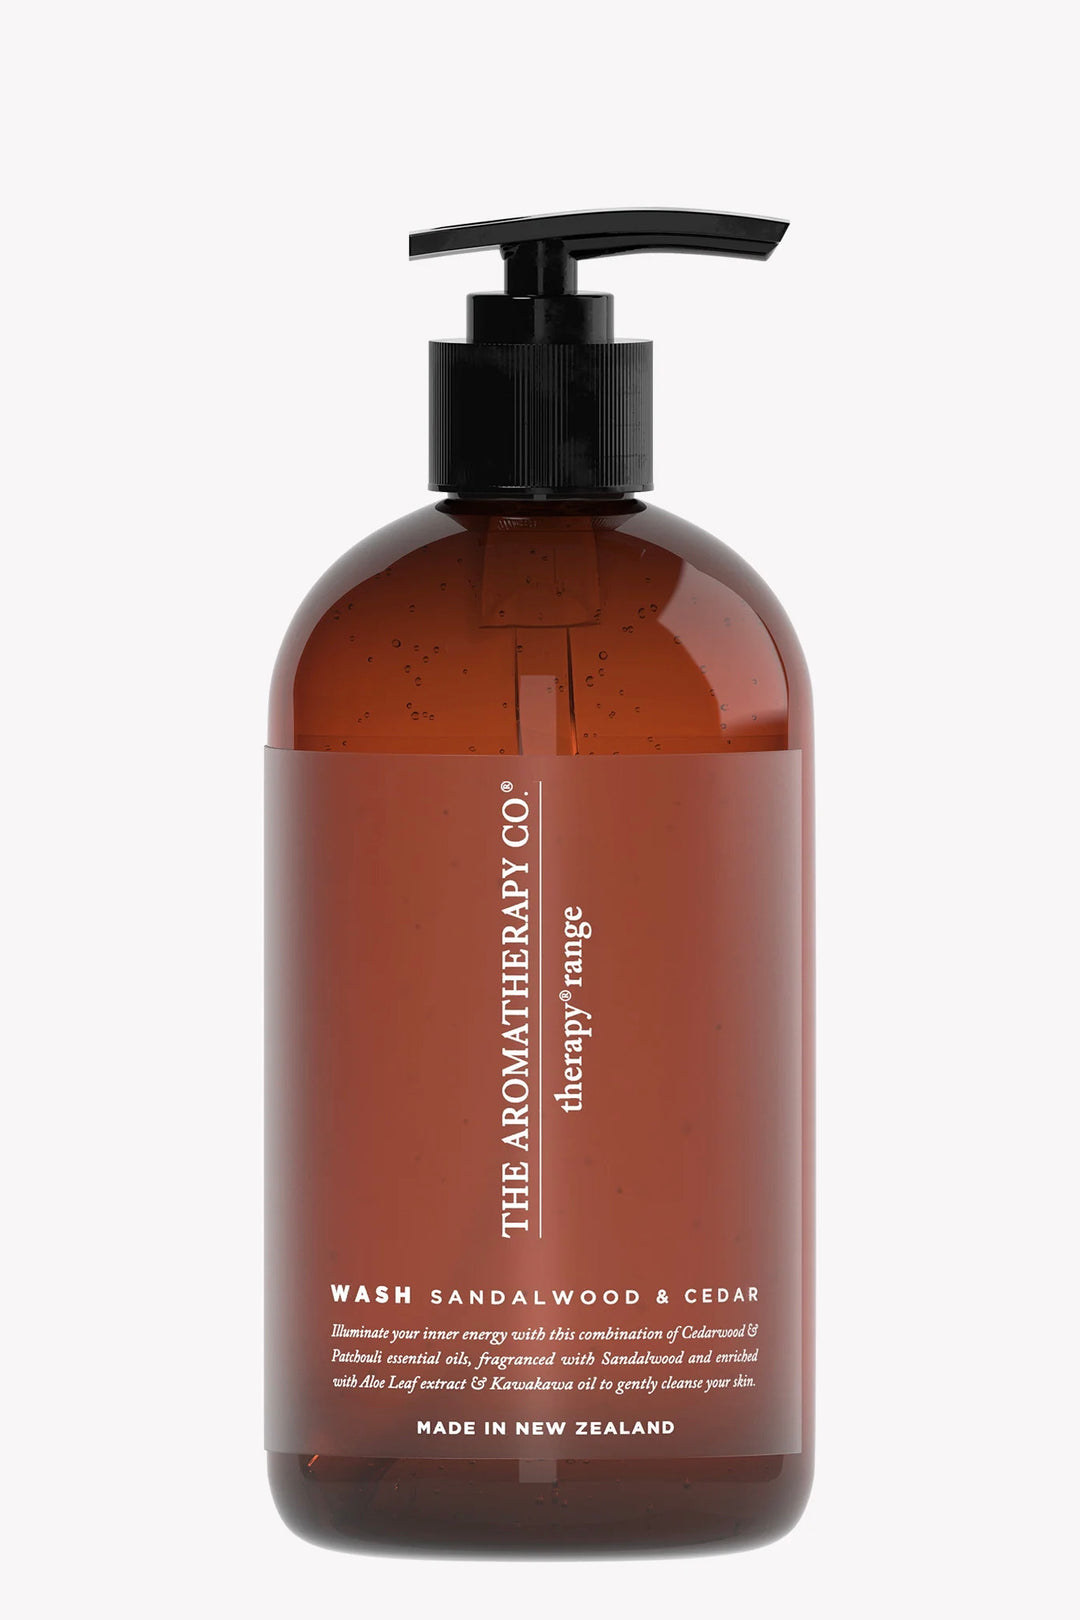 THE AROMA THERAPY CO - Therapy  H & B Wash 500 ml-  Strength - Sandalwood & Cedar - Dale